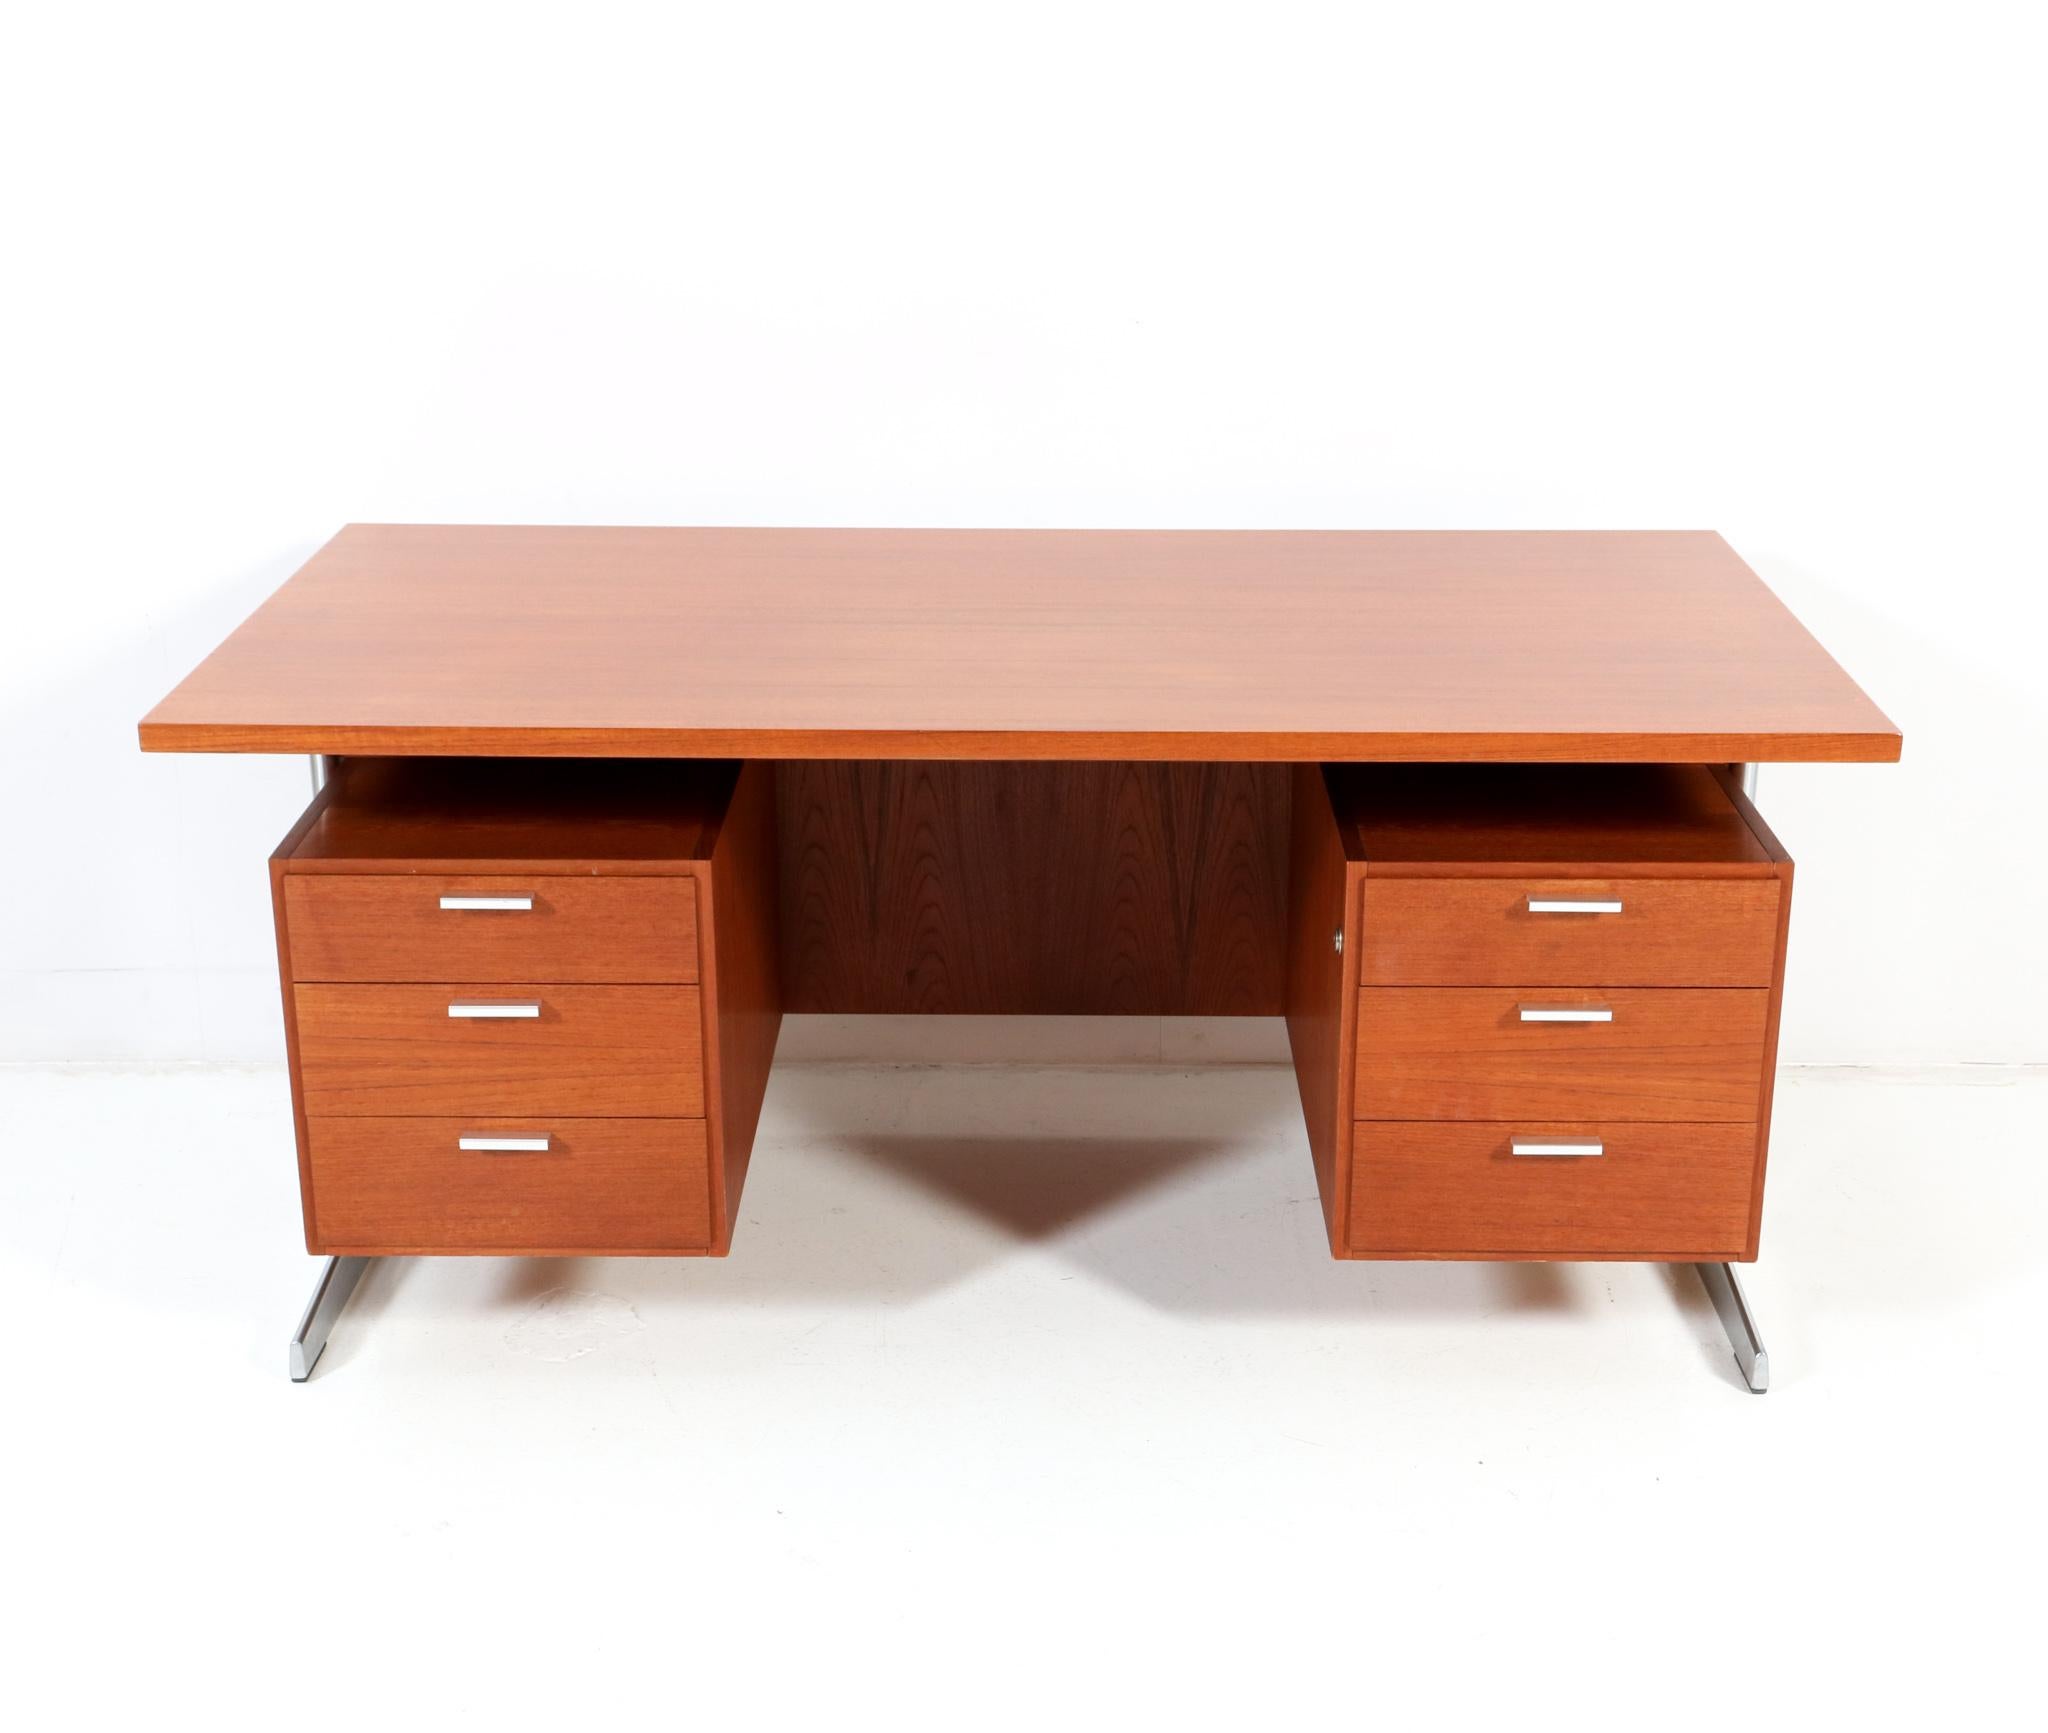 Stunning and elegant Mid-Century Modern executive desk.
Design by Cees Braakman for Pastoe.
Striking Dutch design from the 1960s.
Two chrome-plated metal legs with the original teak veneered base which has six original drawers.
One drawer is